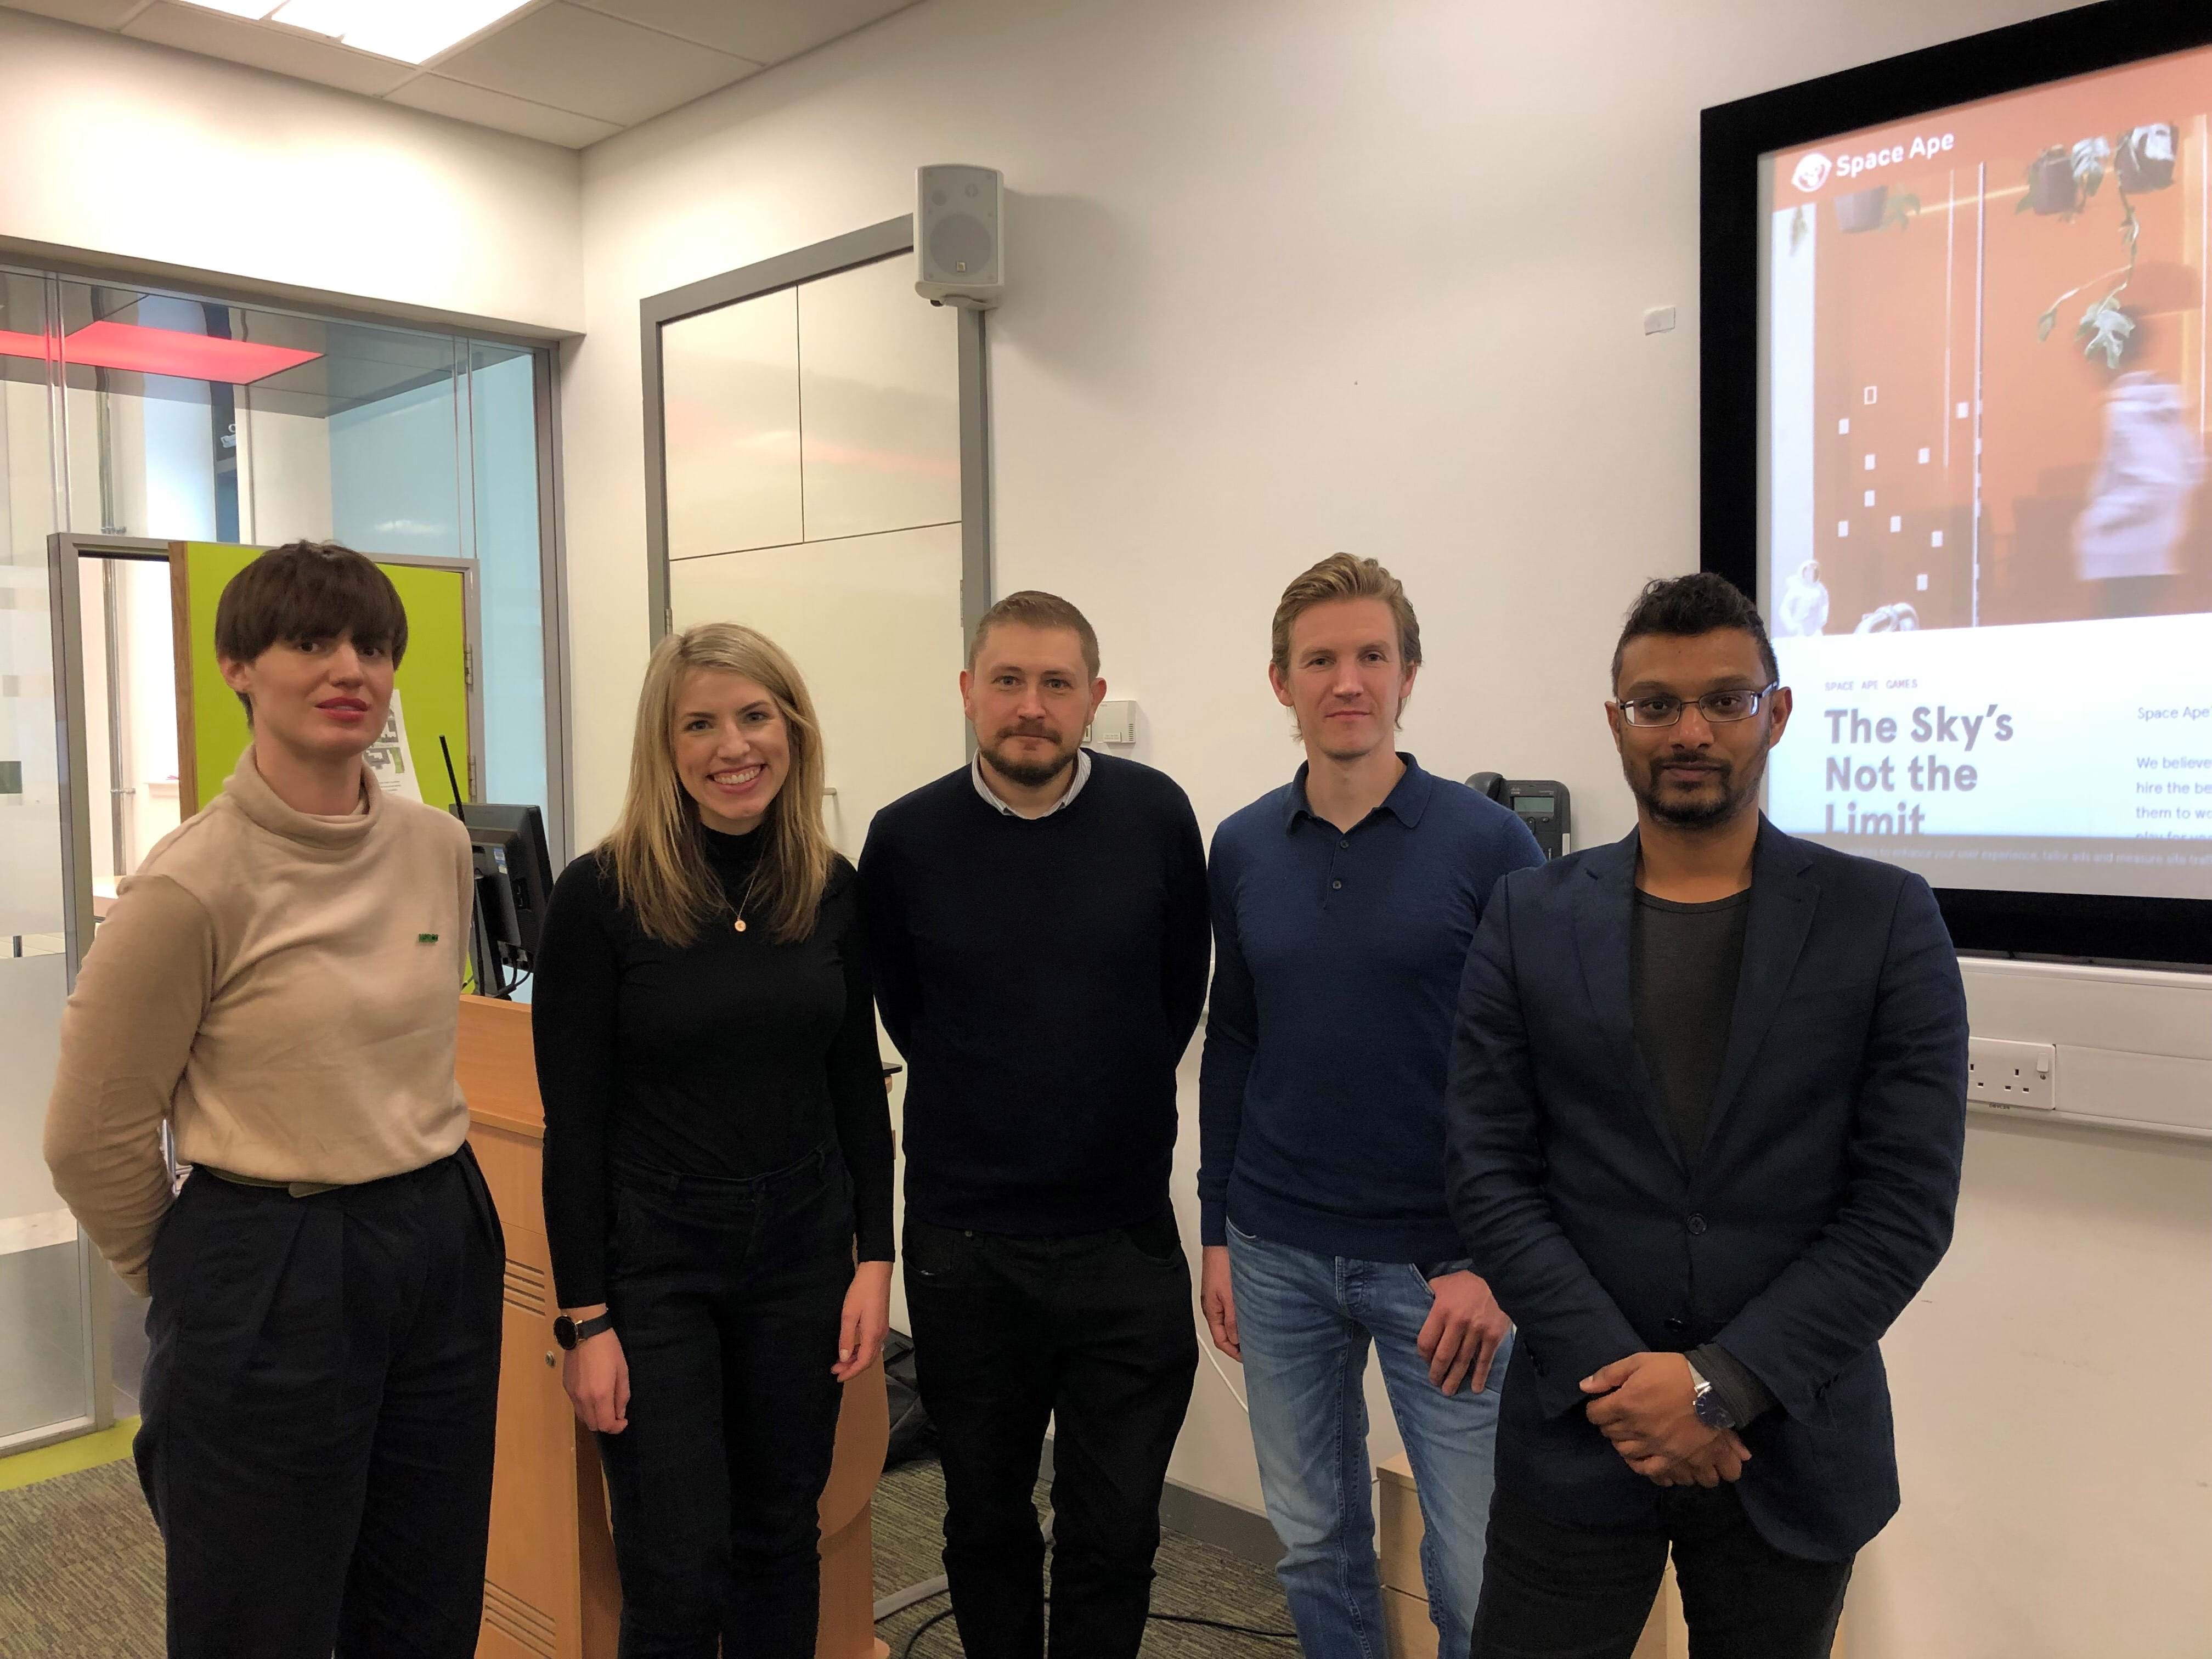 Left to right: Laura Clarke, Policy Officer NSPCC; Karen Hutchison, Senior Officer CEOP Partnership Delivery (NCA); Andy Burrows, Head of Child Safety Online Policy, NSPCC; Max Bauer, Head of Customer Service, Space Ape Games; Darshana Jayemanne, Lecturer in Games and Arts, Abertay University